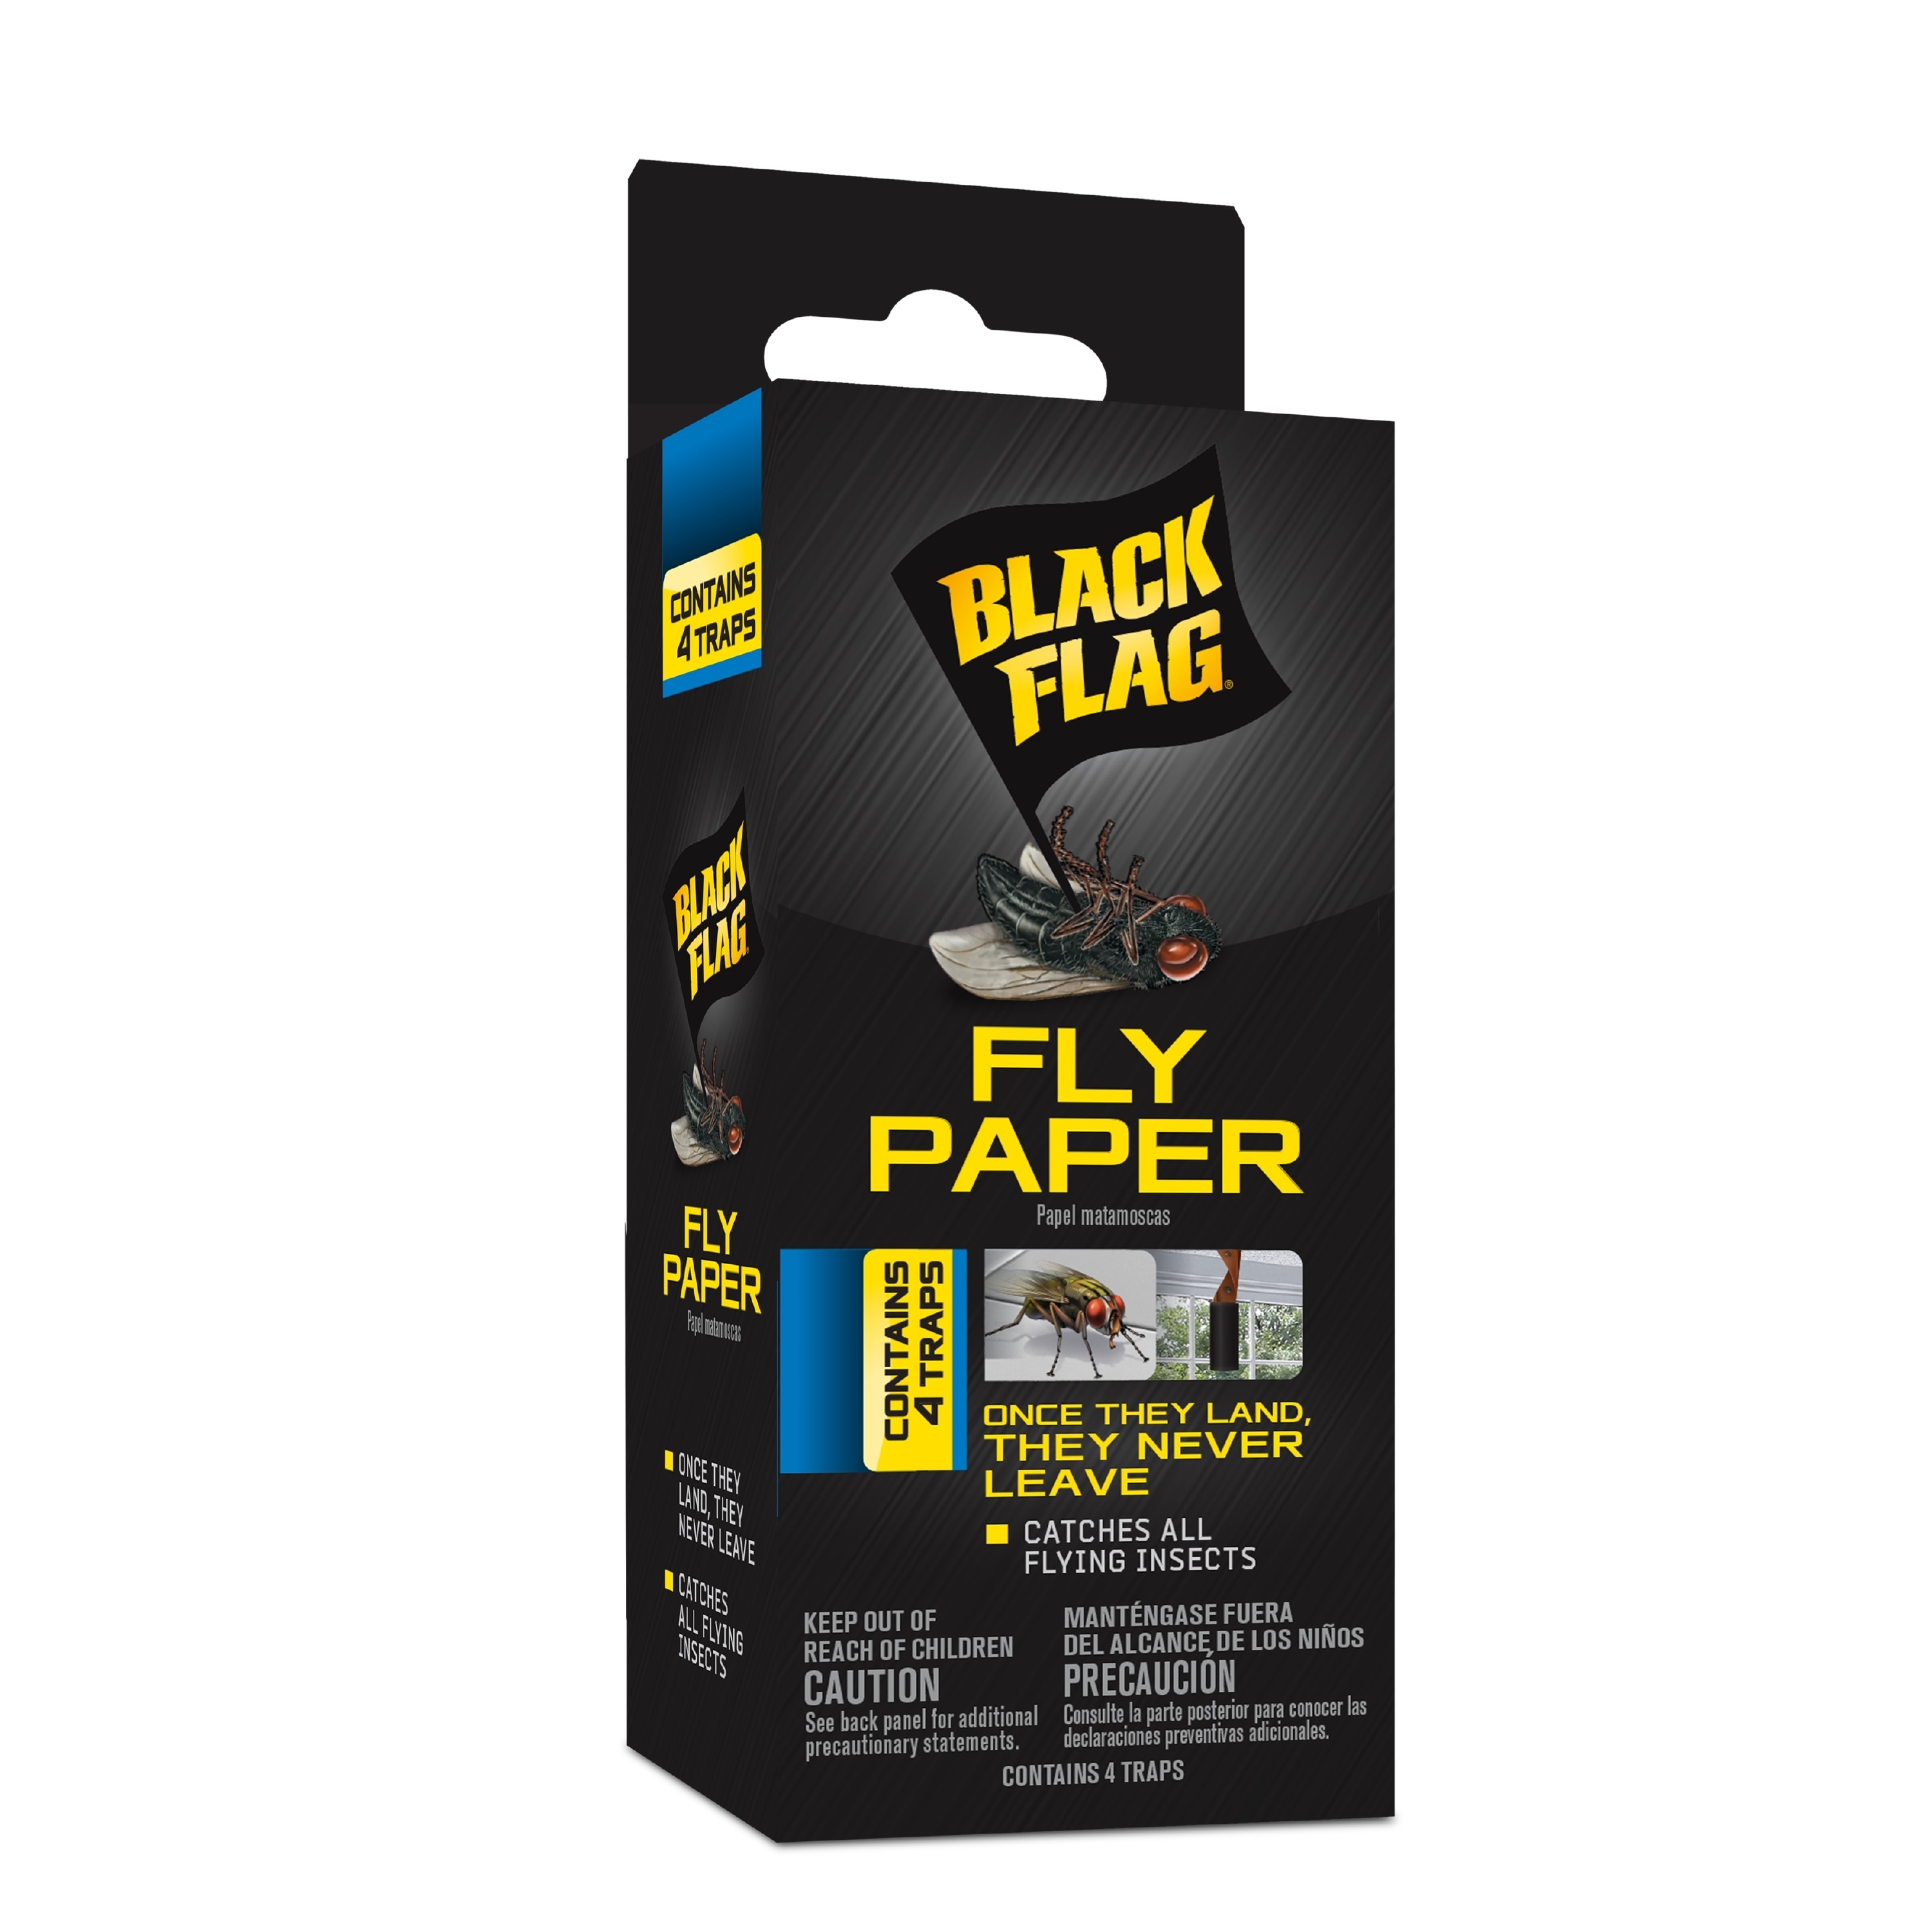 BLACK+DECKER Fly Traps Outdoor and Fruit Fly Traps for Indoors- Hanging Fly  Trap Paper Roll- Sticky Glue Paper 2 - 30 ft. Rolls 2pk-BDXPC806 - The Home  Depot